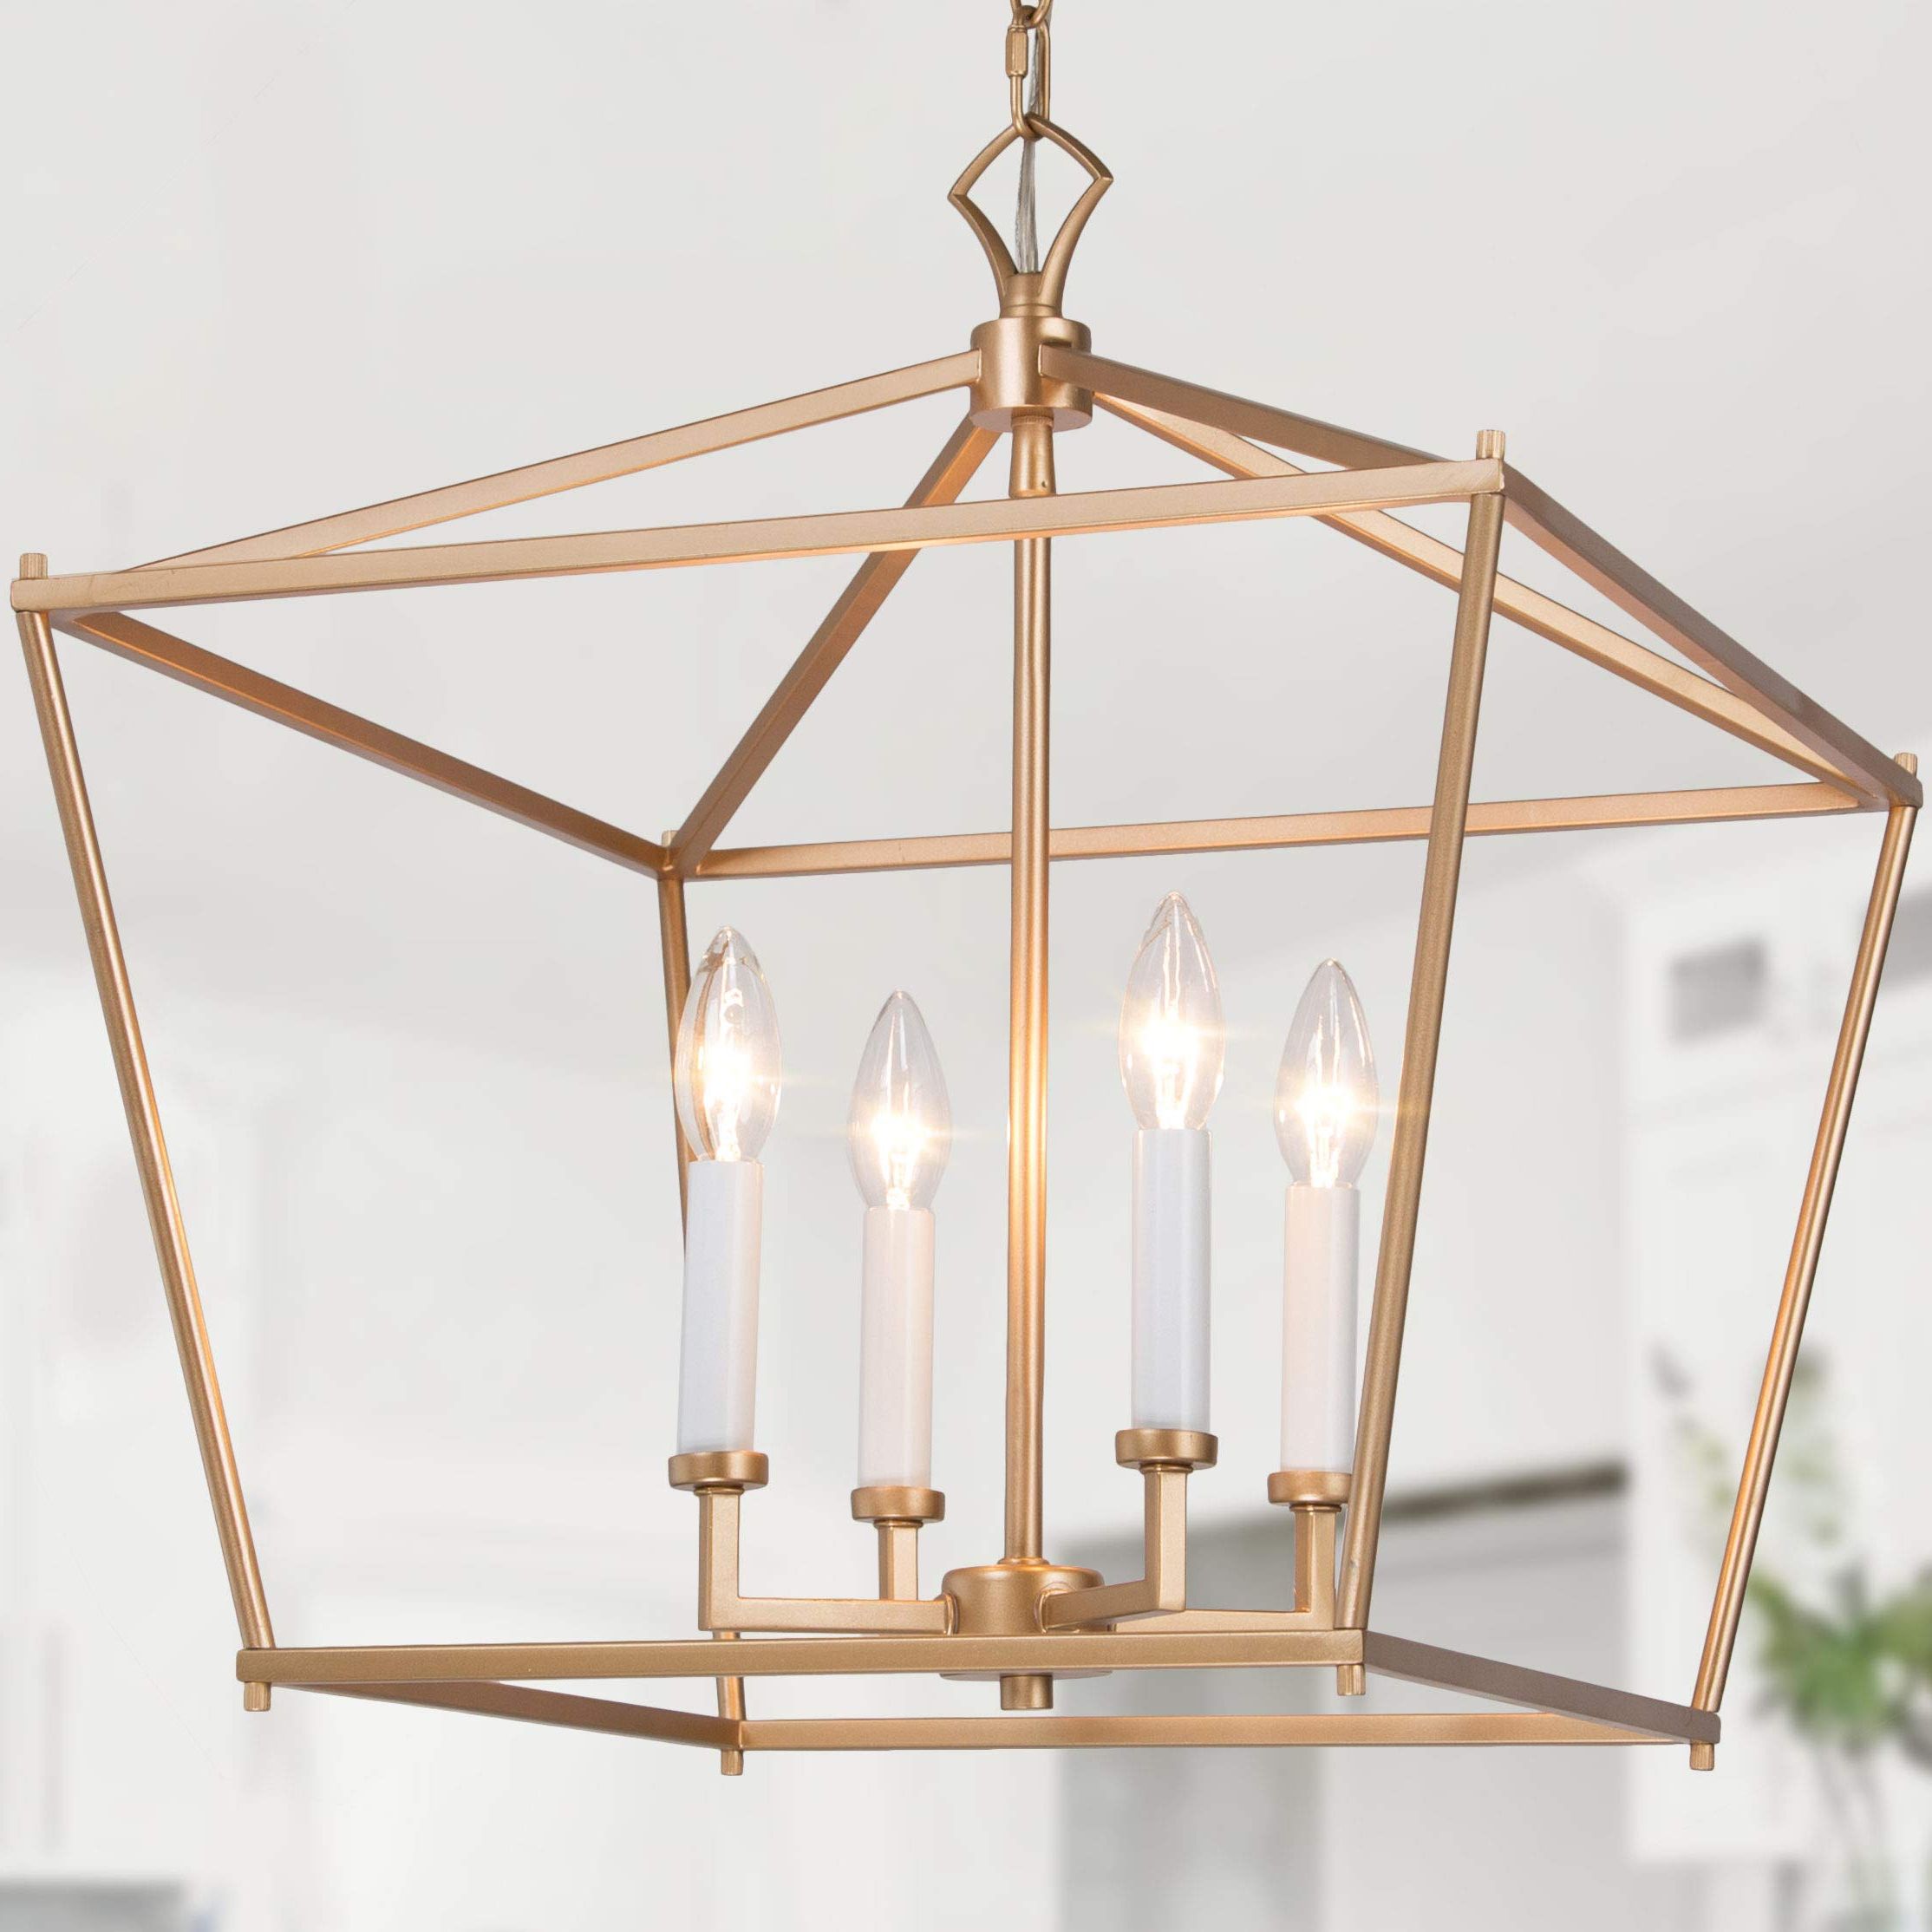 Antique Gold Lantern Chandeliers With Regard To Most Popular Gold Chandelier, Lantern Pendant Light Fixtures, Foyer Chandelier For  Dining Room, Kitchen Island, Entryway, 17.5'' L X  (View 11 of 15)